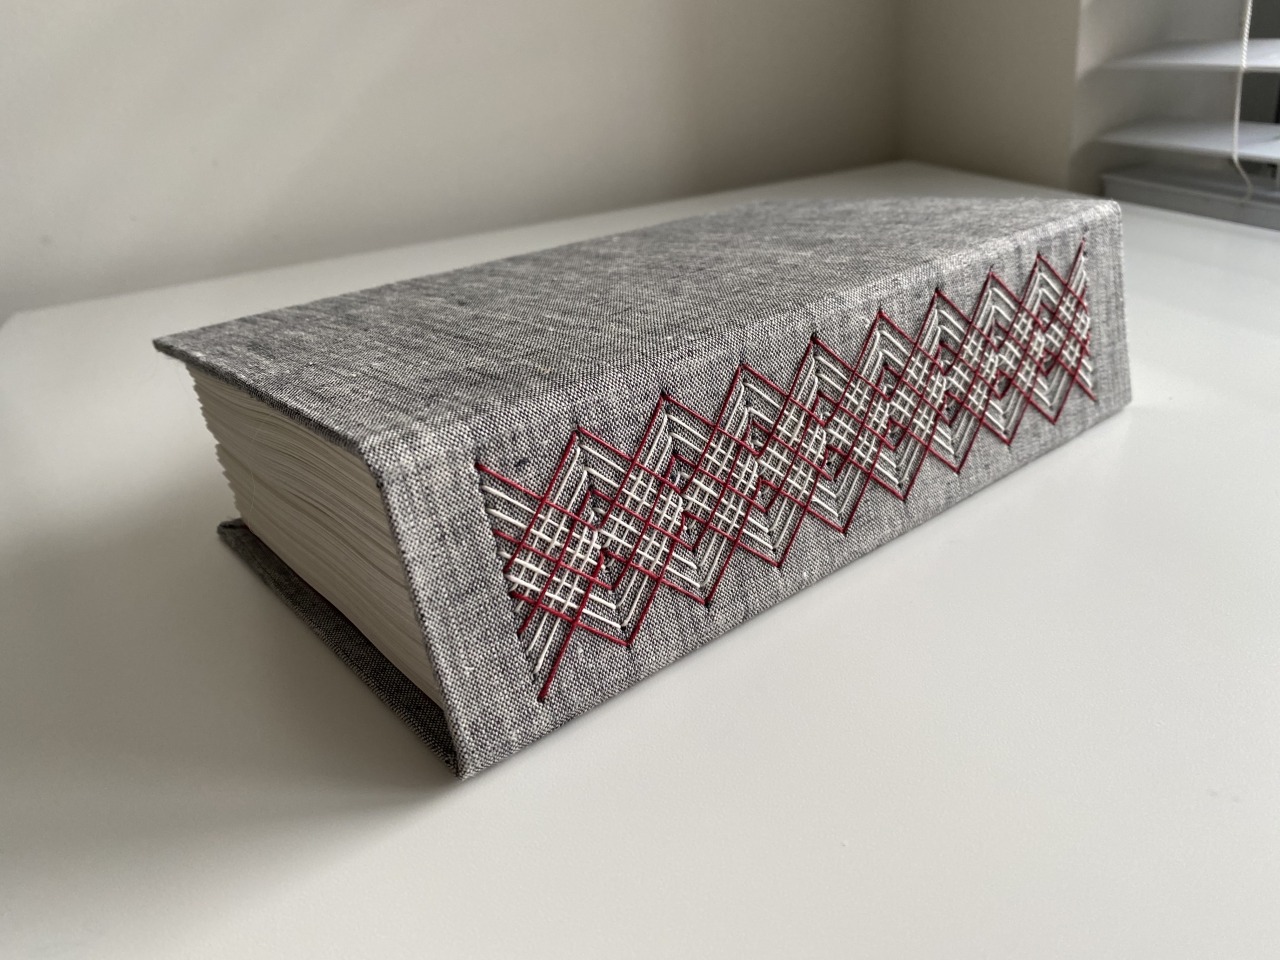 Side-lying hardcover book with ornate red-and-white stitching decorating spine